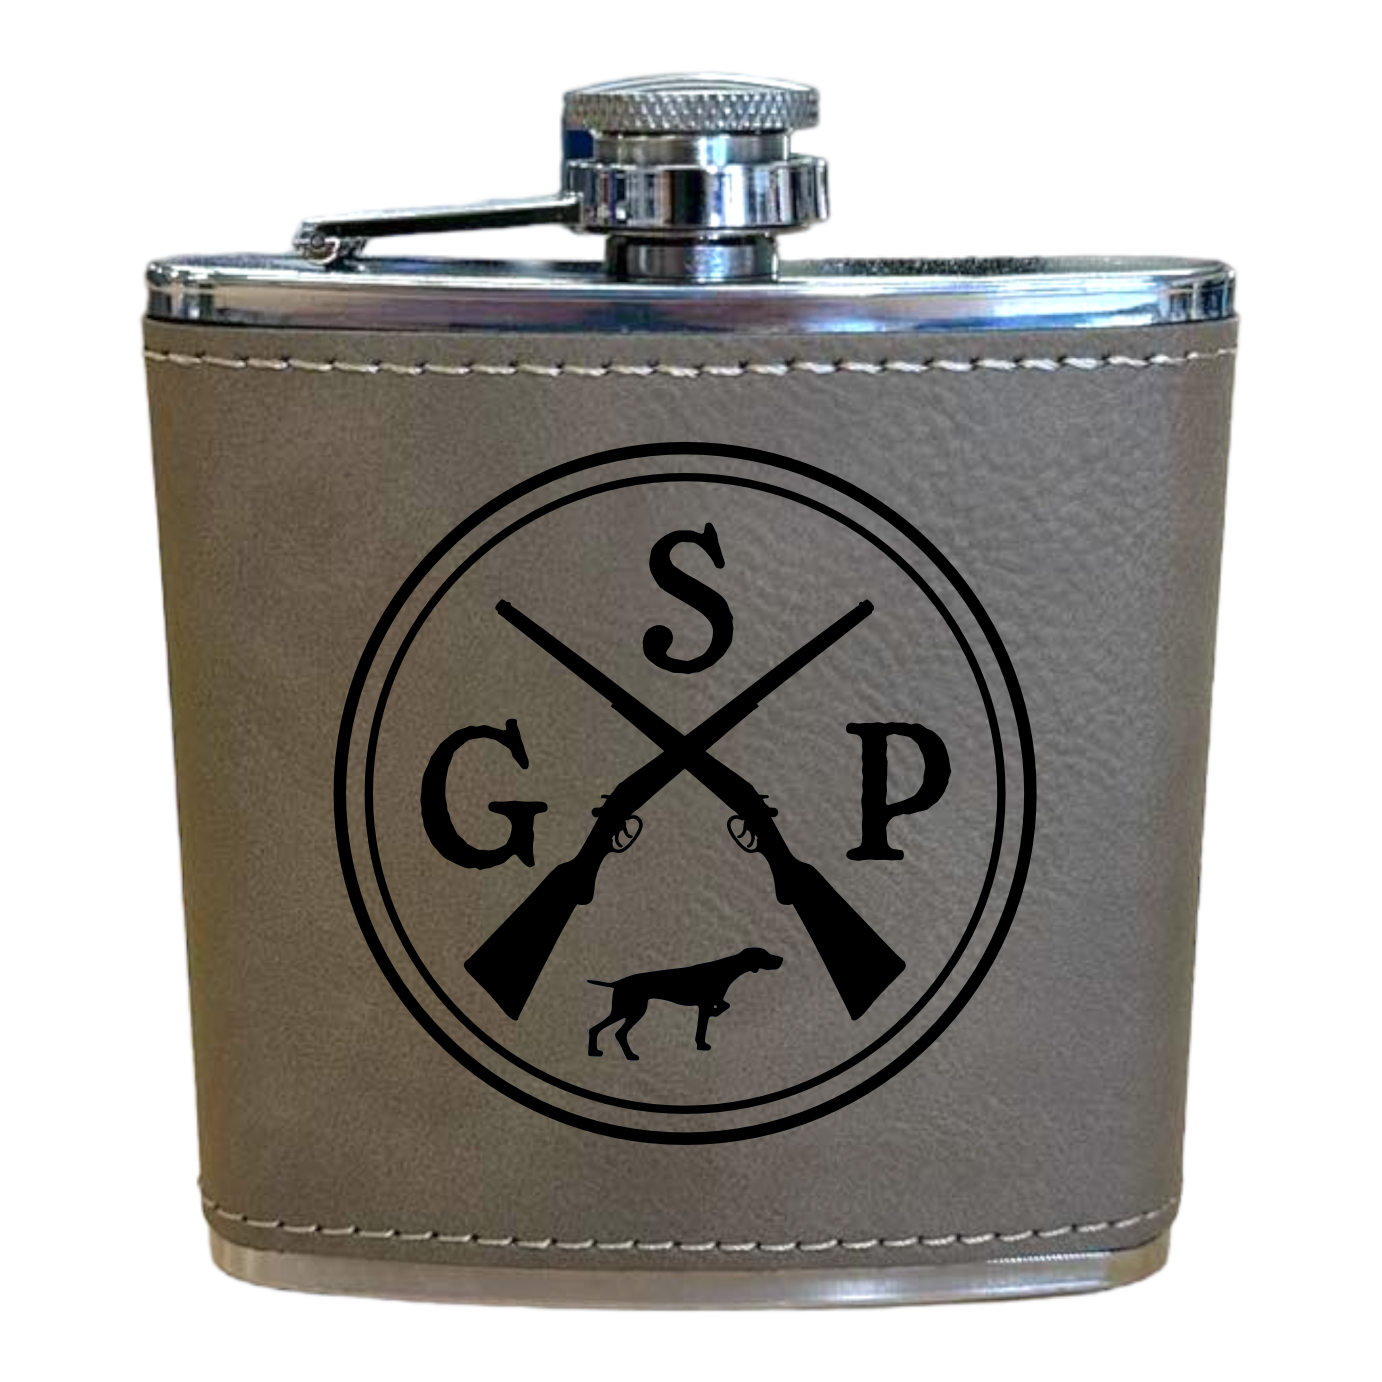 GSP Flask